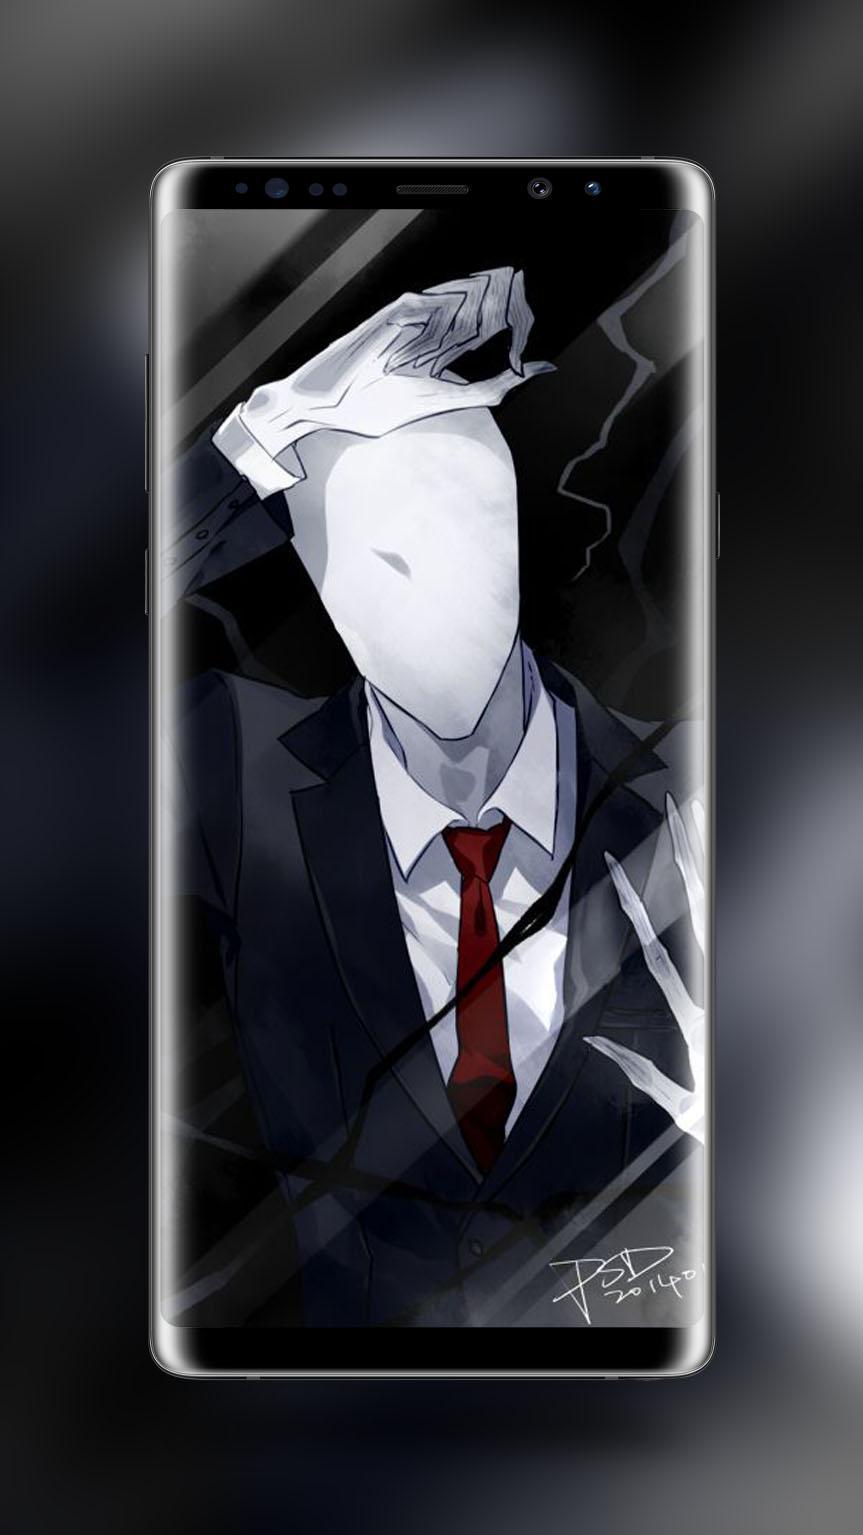 Slenderman Wallpapers Hd For Android Apk Download